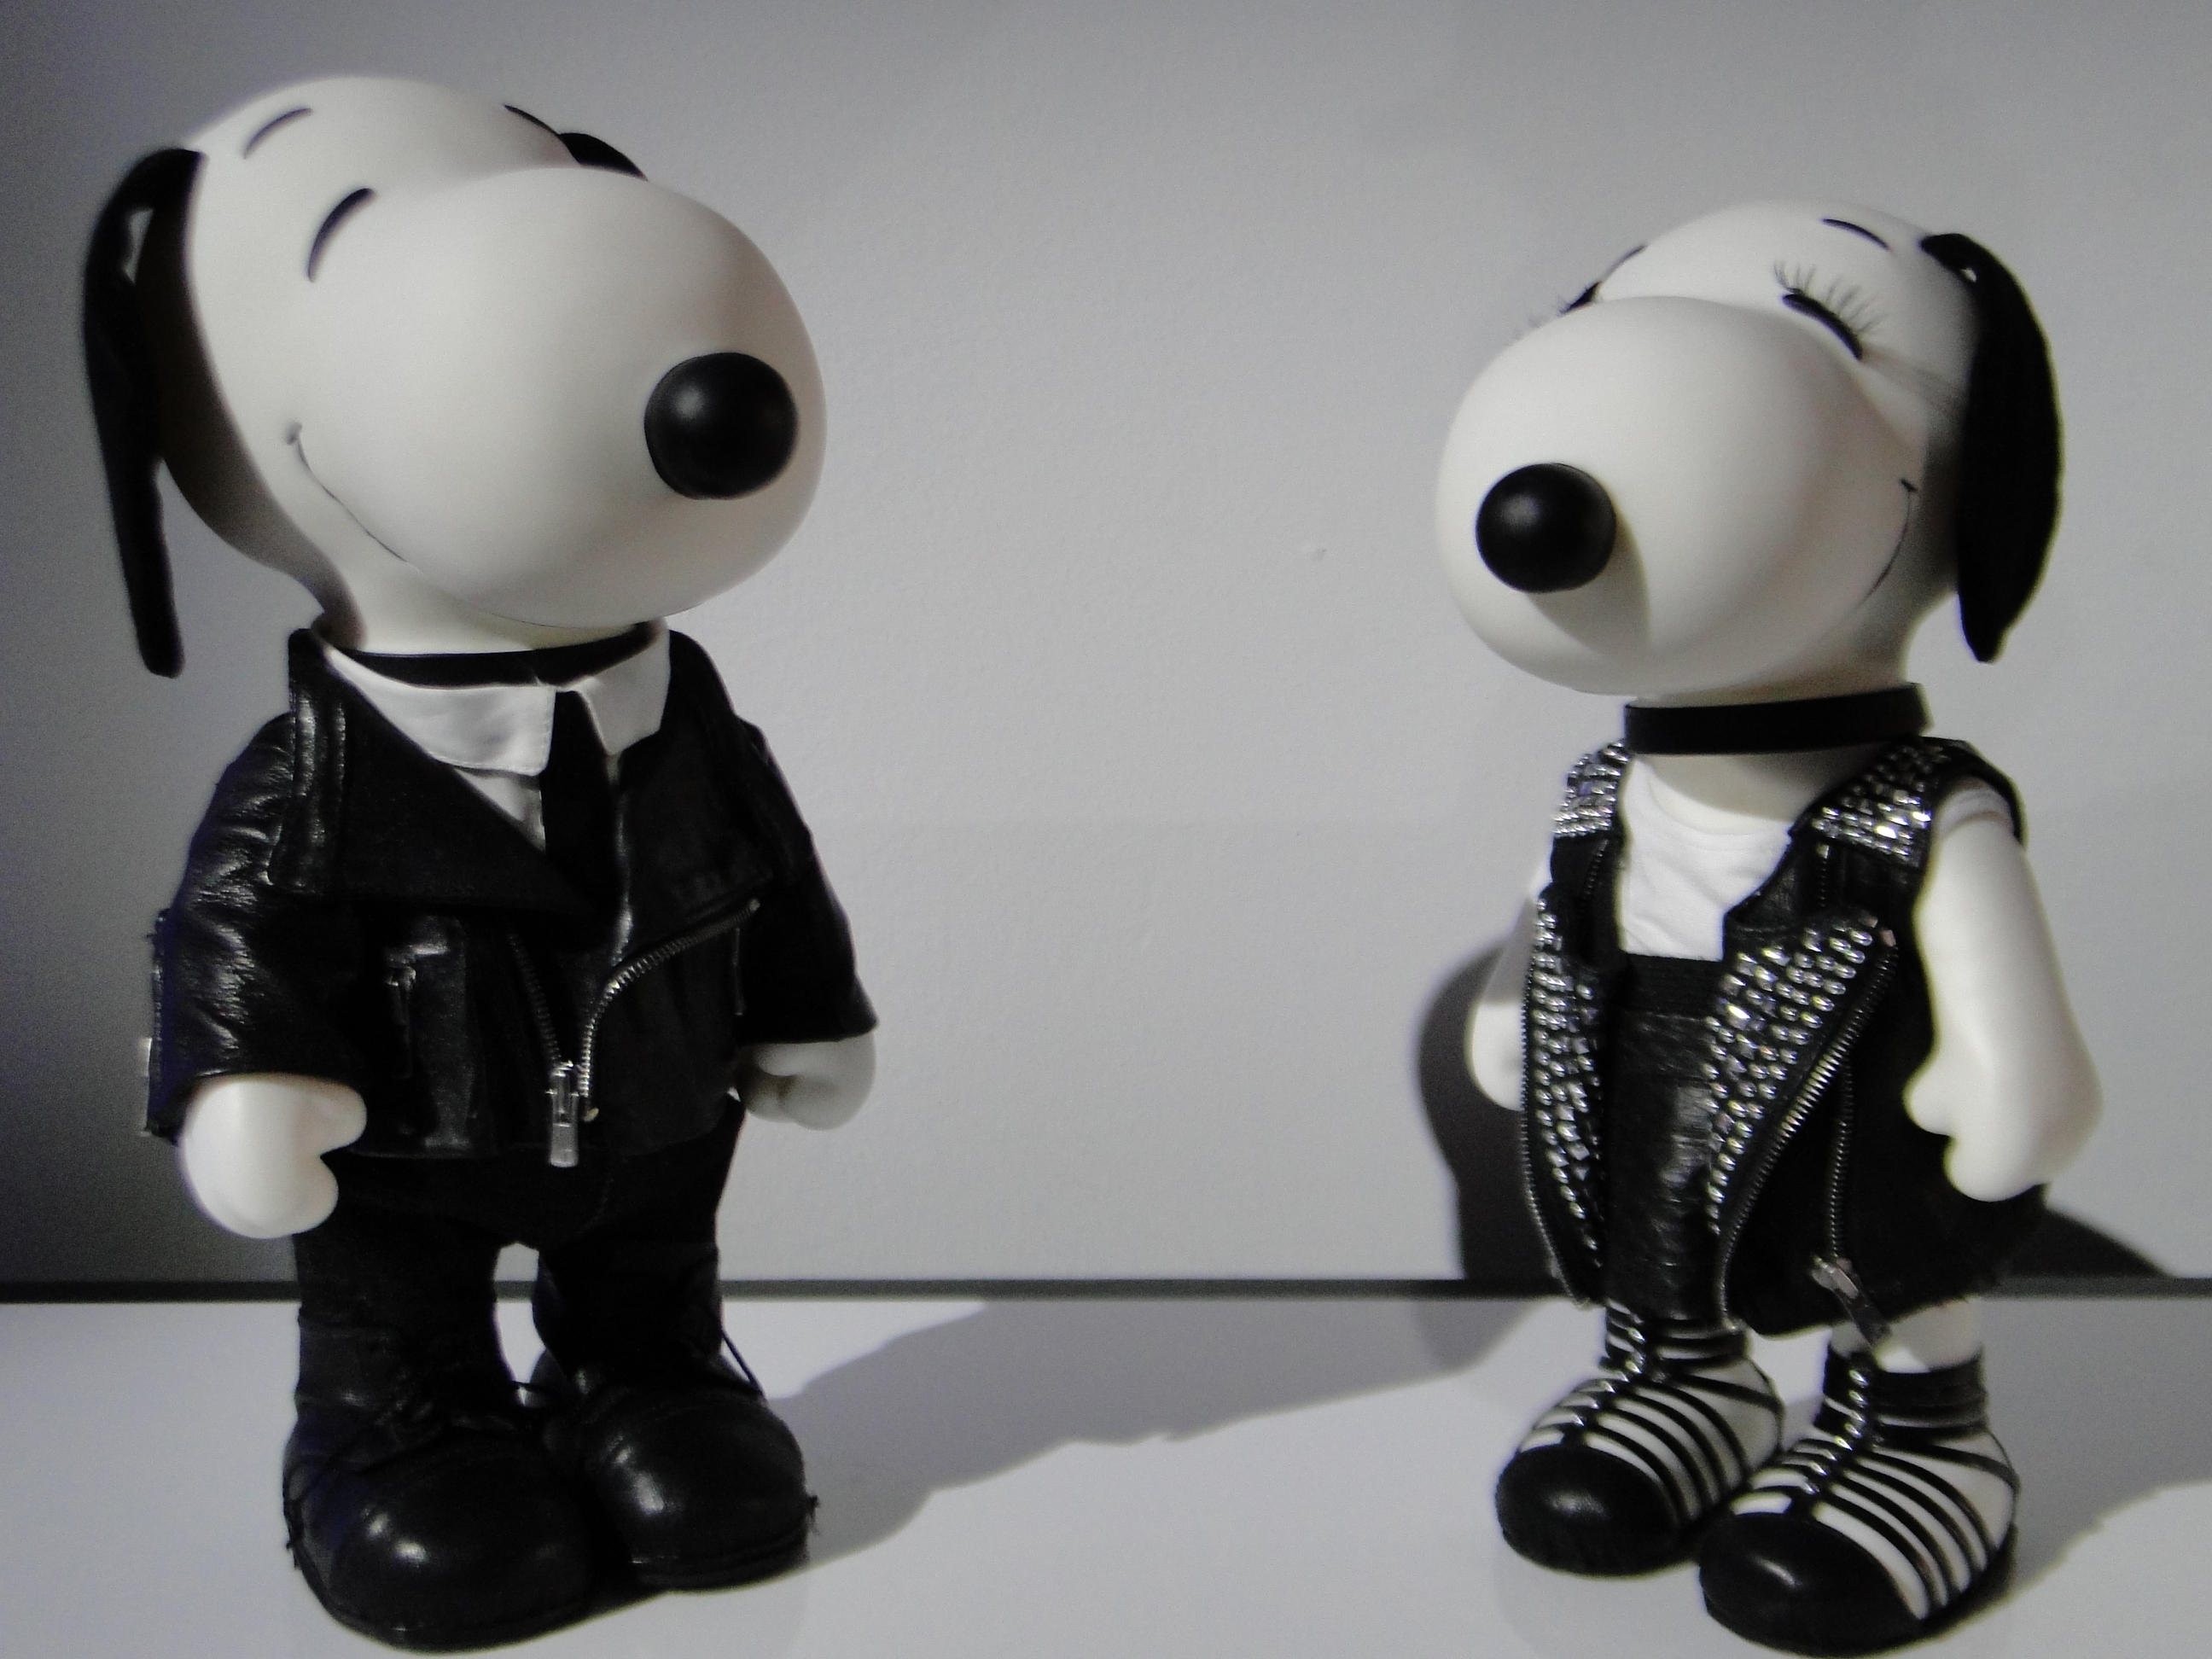 SNOOPY AND BELE IN FASHION Paris France Exhibition Exposition - Palais de Tokyo - copyright Go with the Blog DSC06441